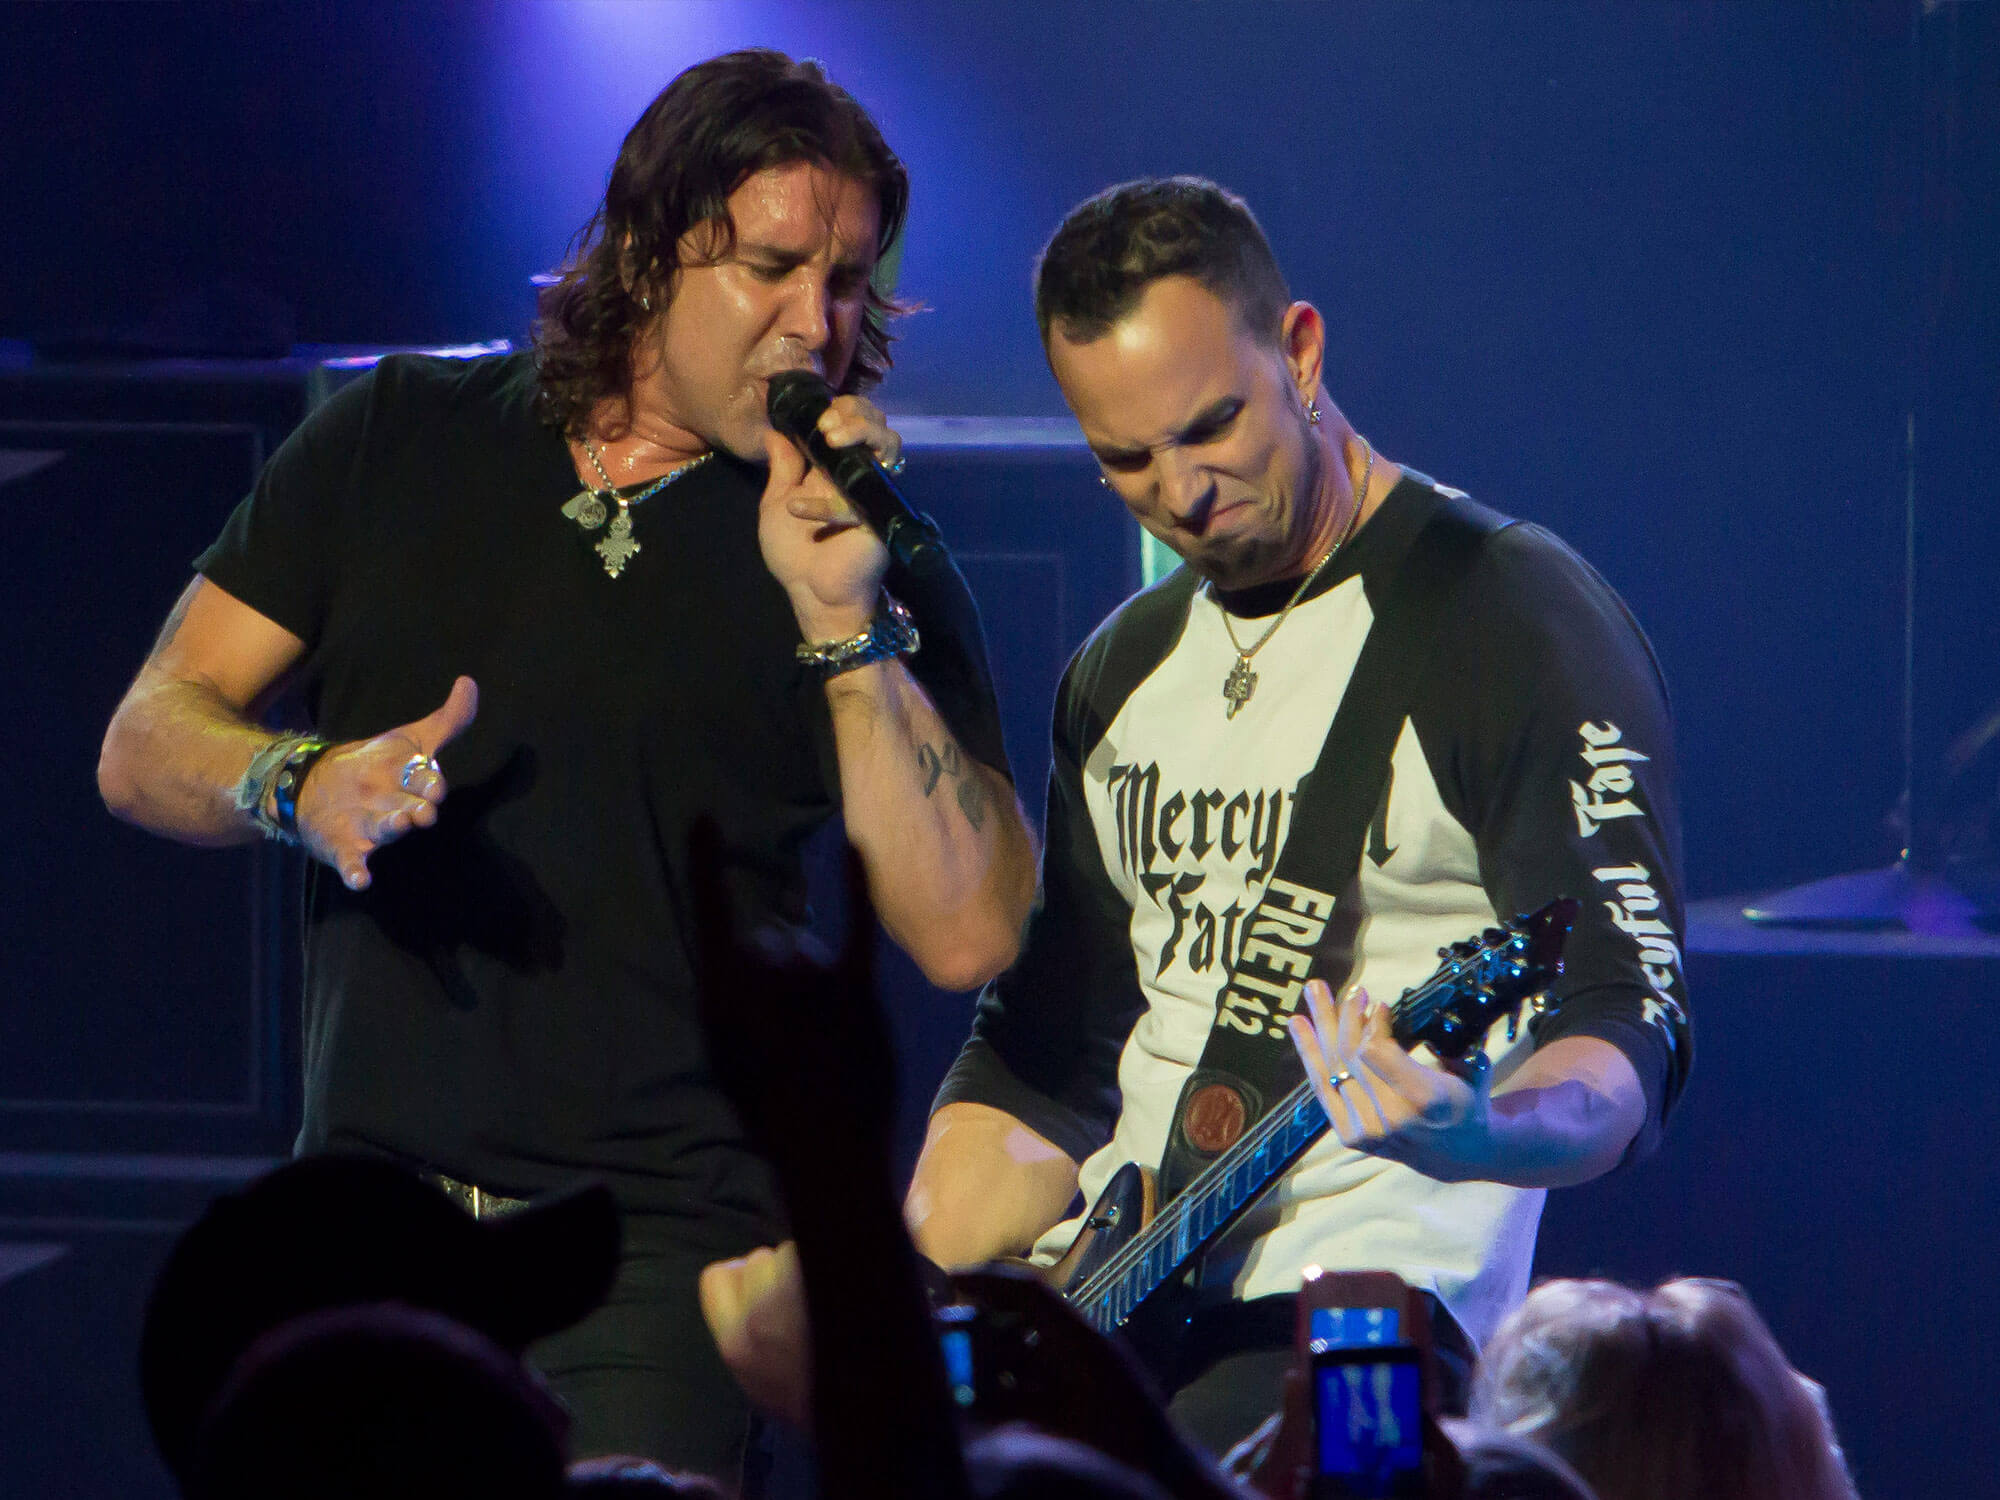 [L-R] Scott Stapp and Mark Tremonti of Creed